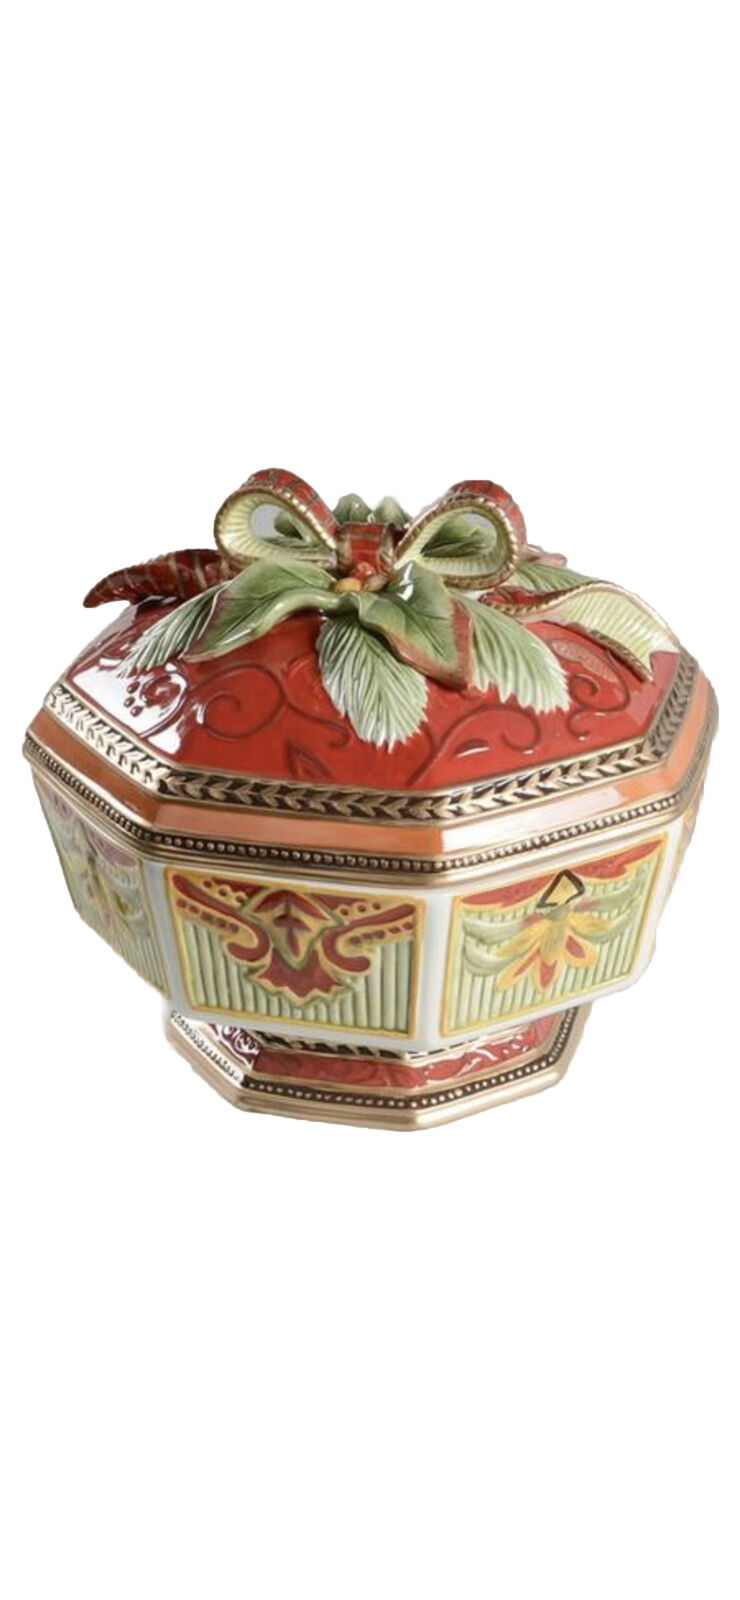 fitz and floyd damask holiday Tureen Christmas -Dessert Bowl Vintage Collector’s